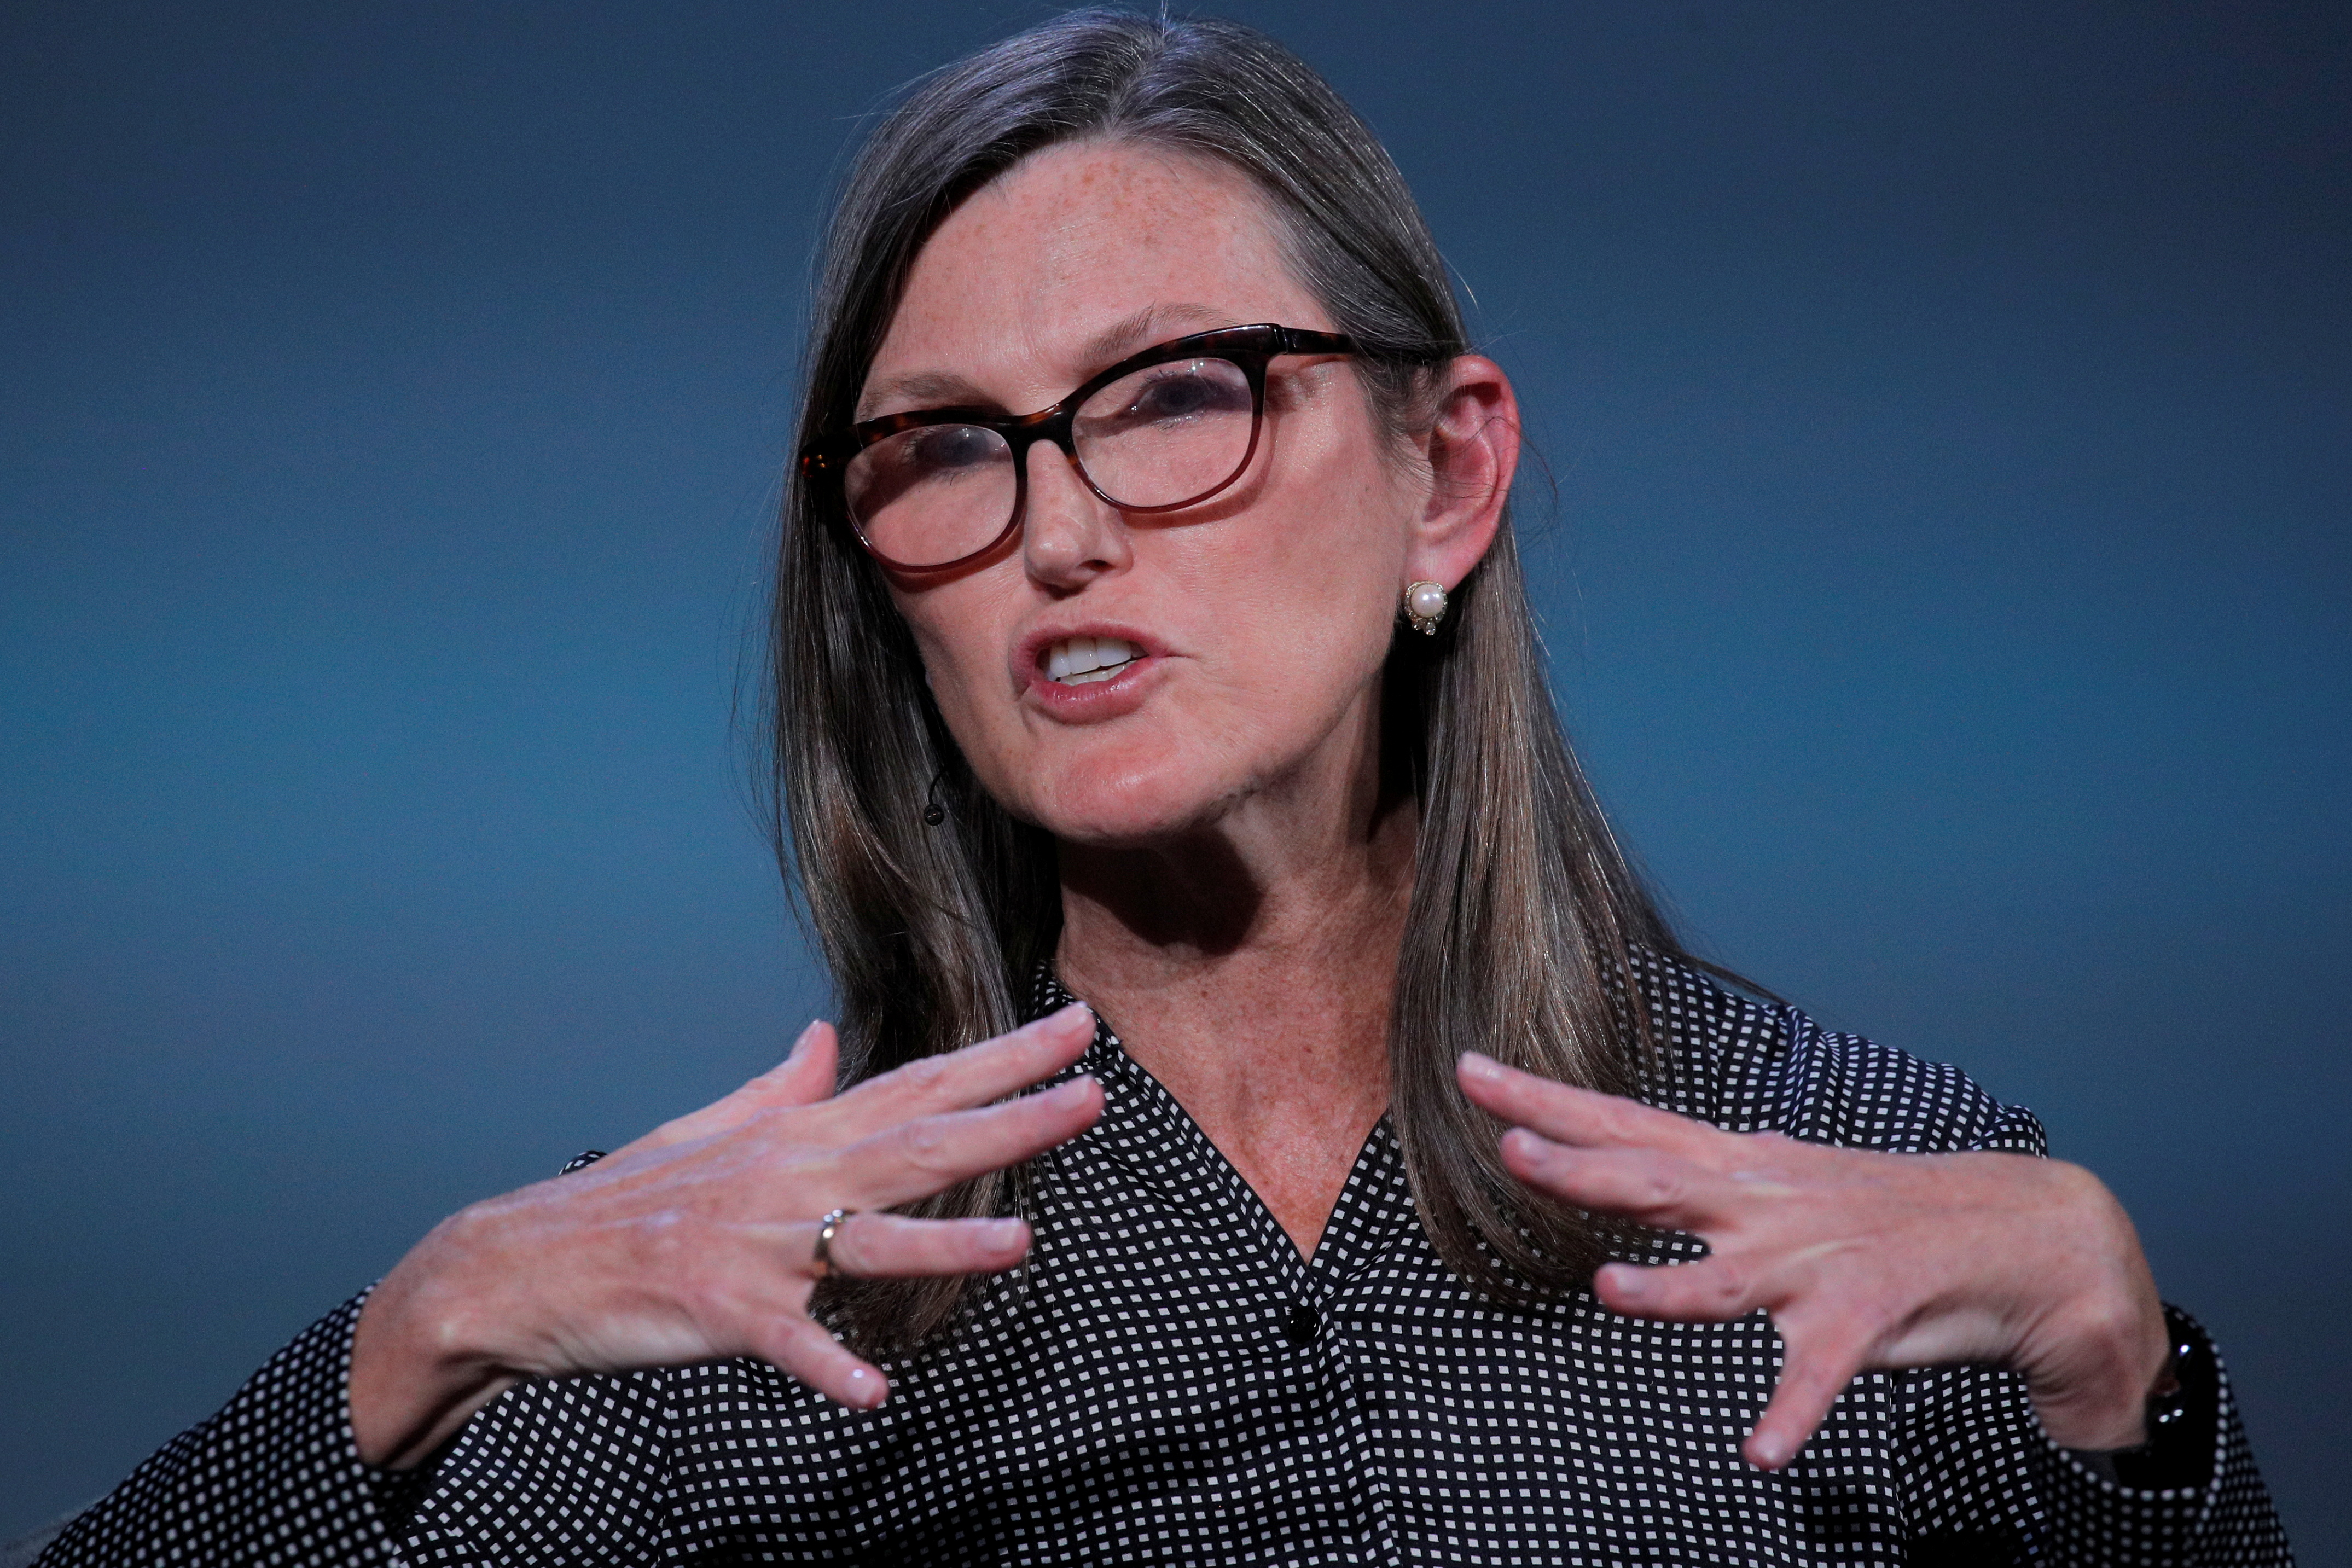 Cathie Wood, founder and CEO of ARK Investment Management LLC, speaks during the Skybridge Capital SALT New York 2021 conference in New York City, U.S., September 13, 2021.  REUTERS/Brendan McDermid/File Photo